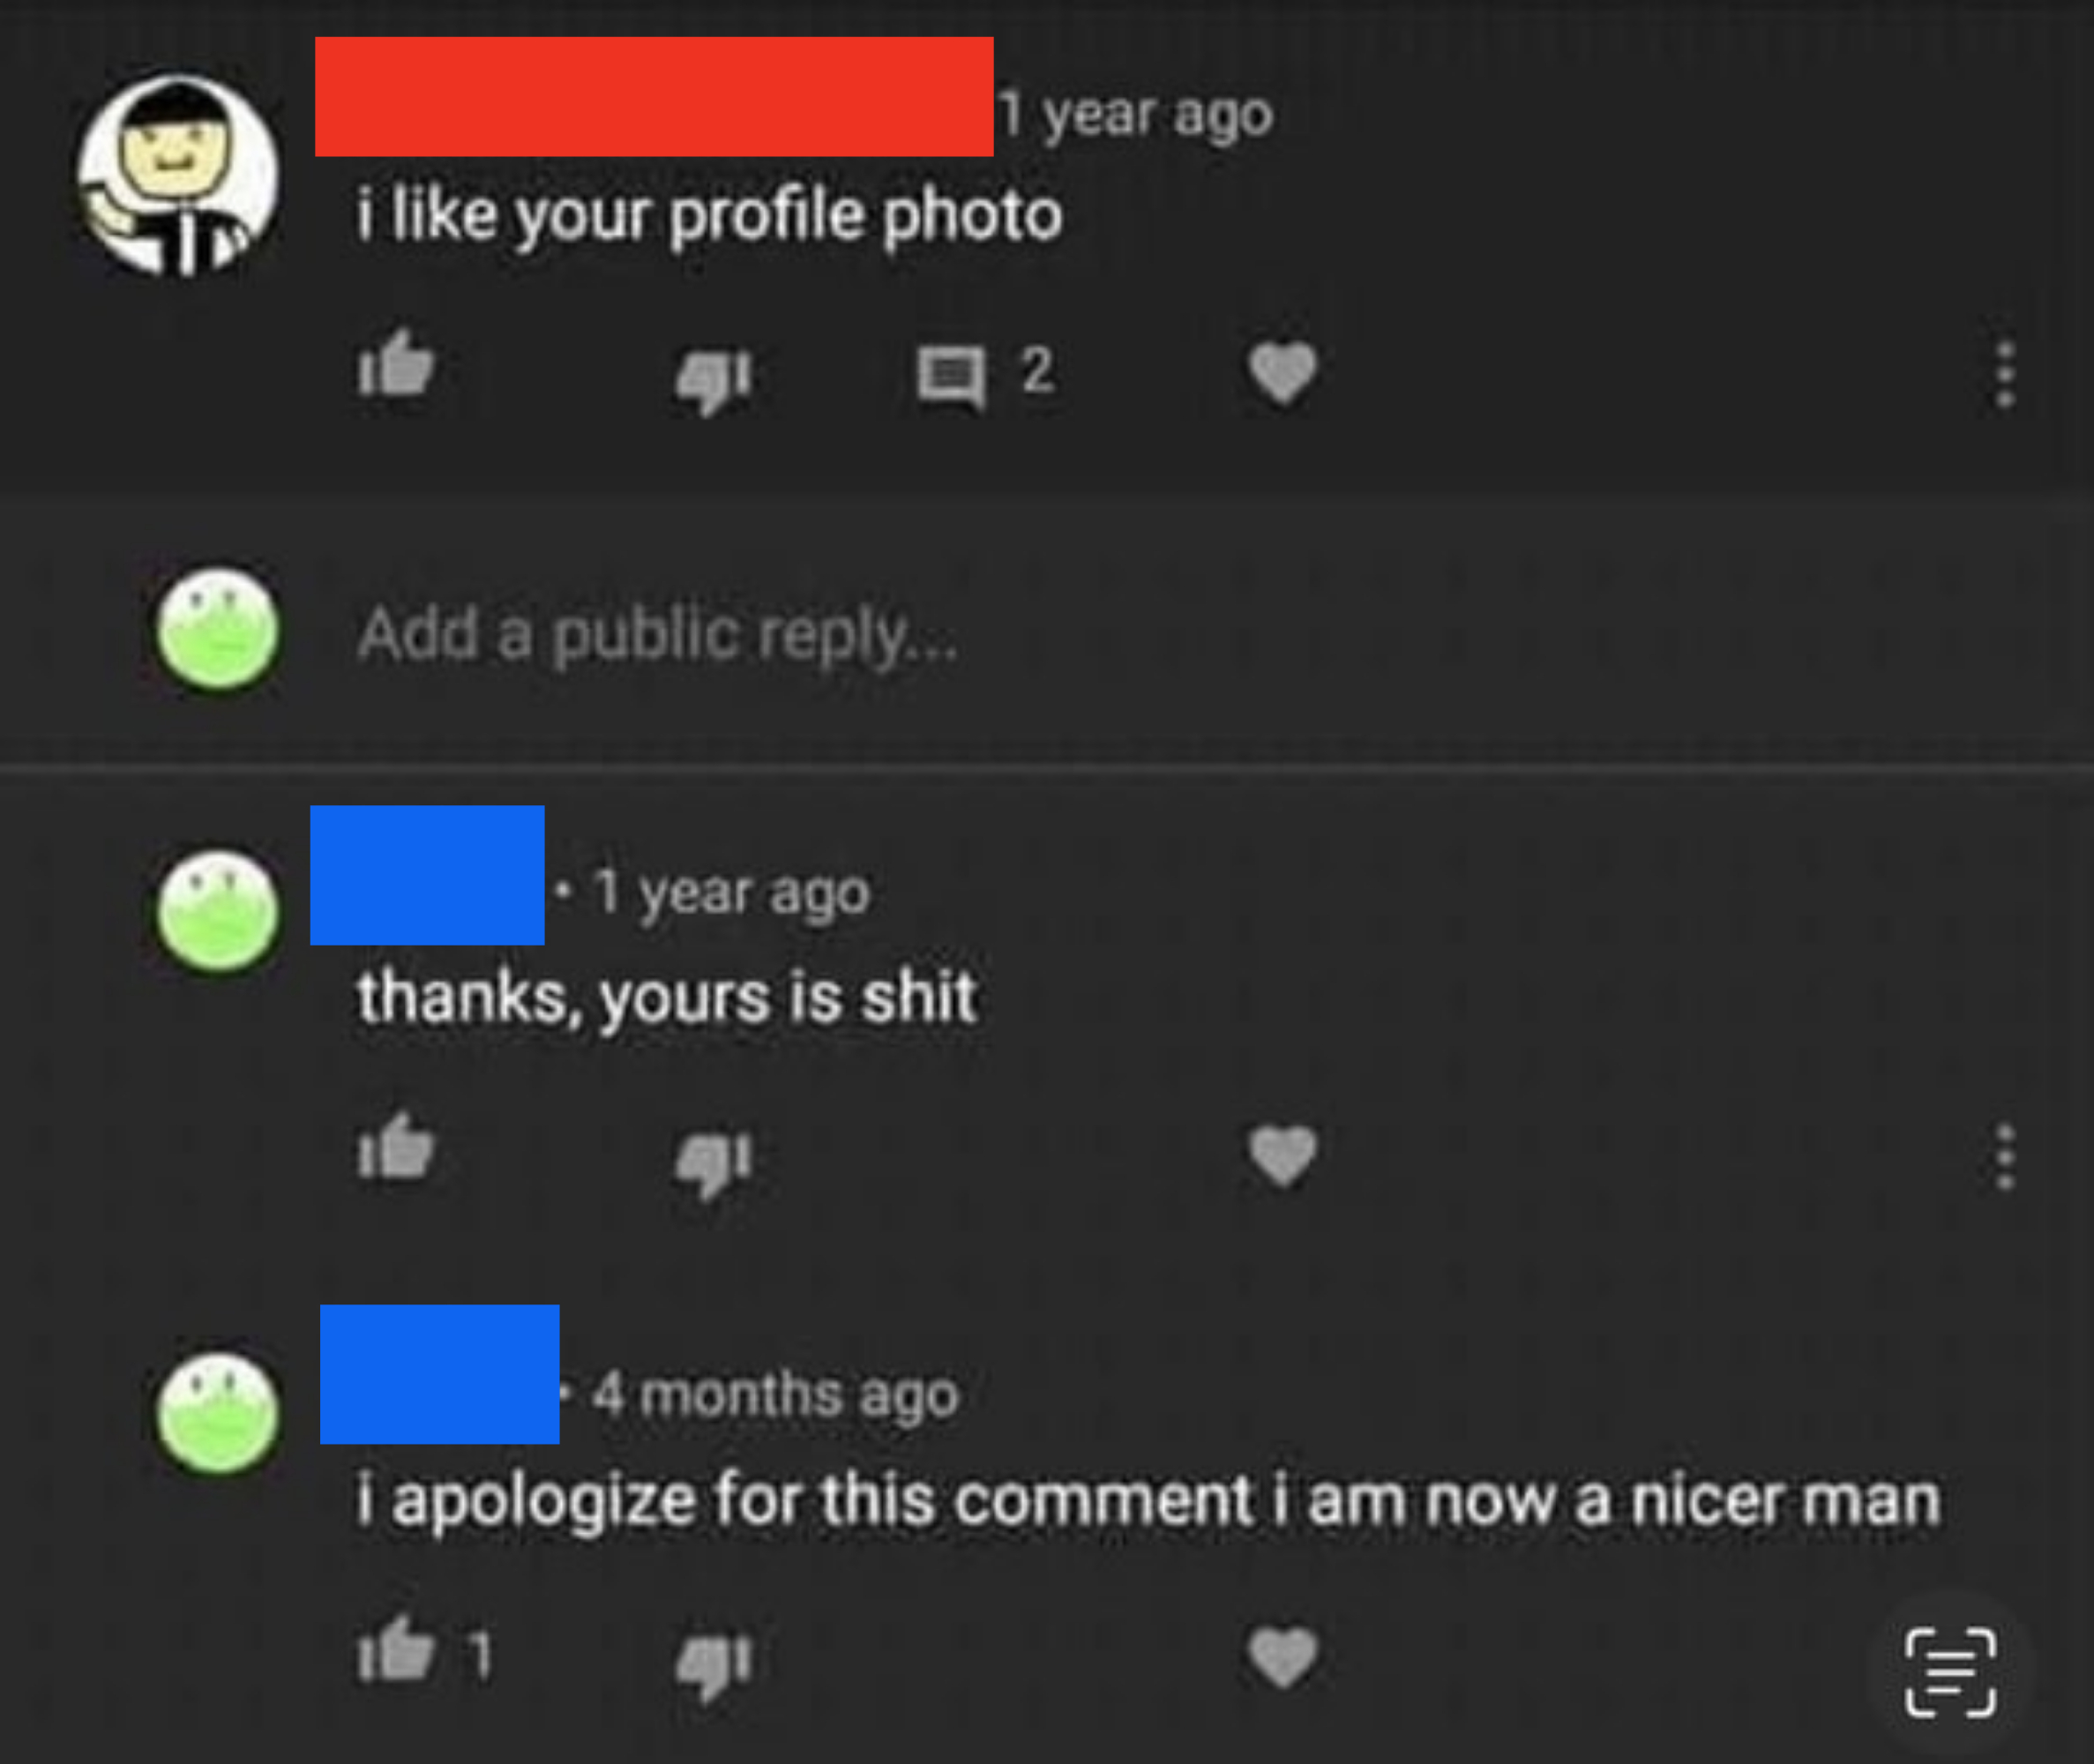 comments left 8 months apart saying they&#x27;re sorry for being mean last time, they are now a nicer man